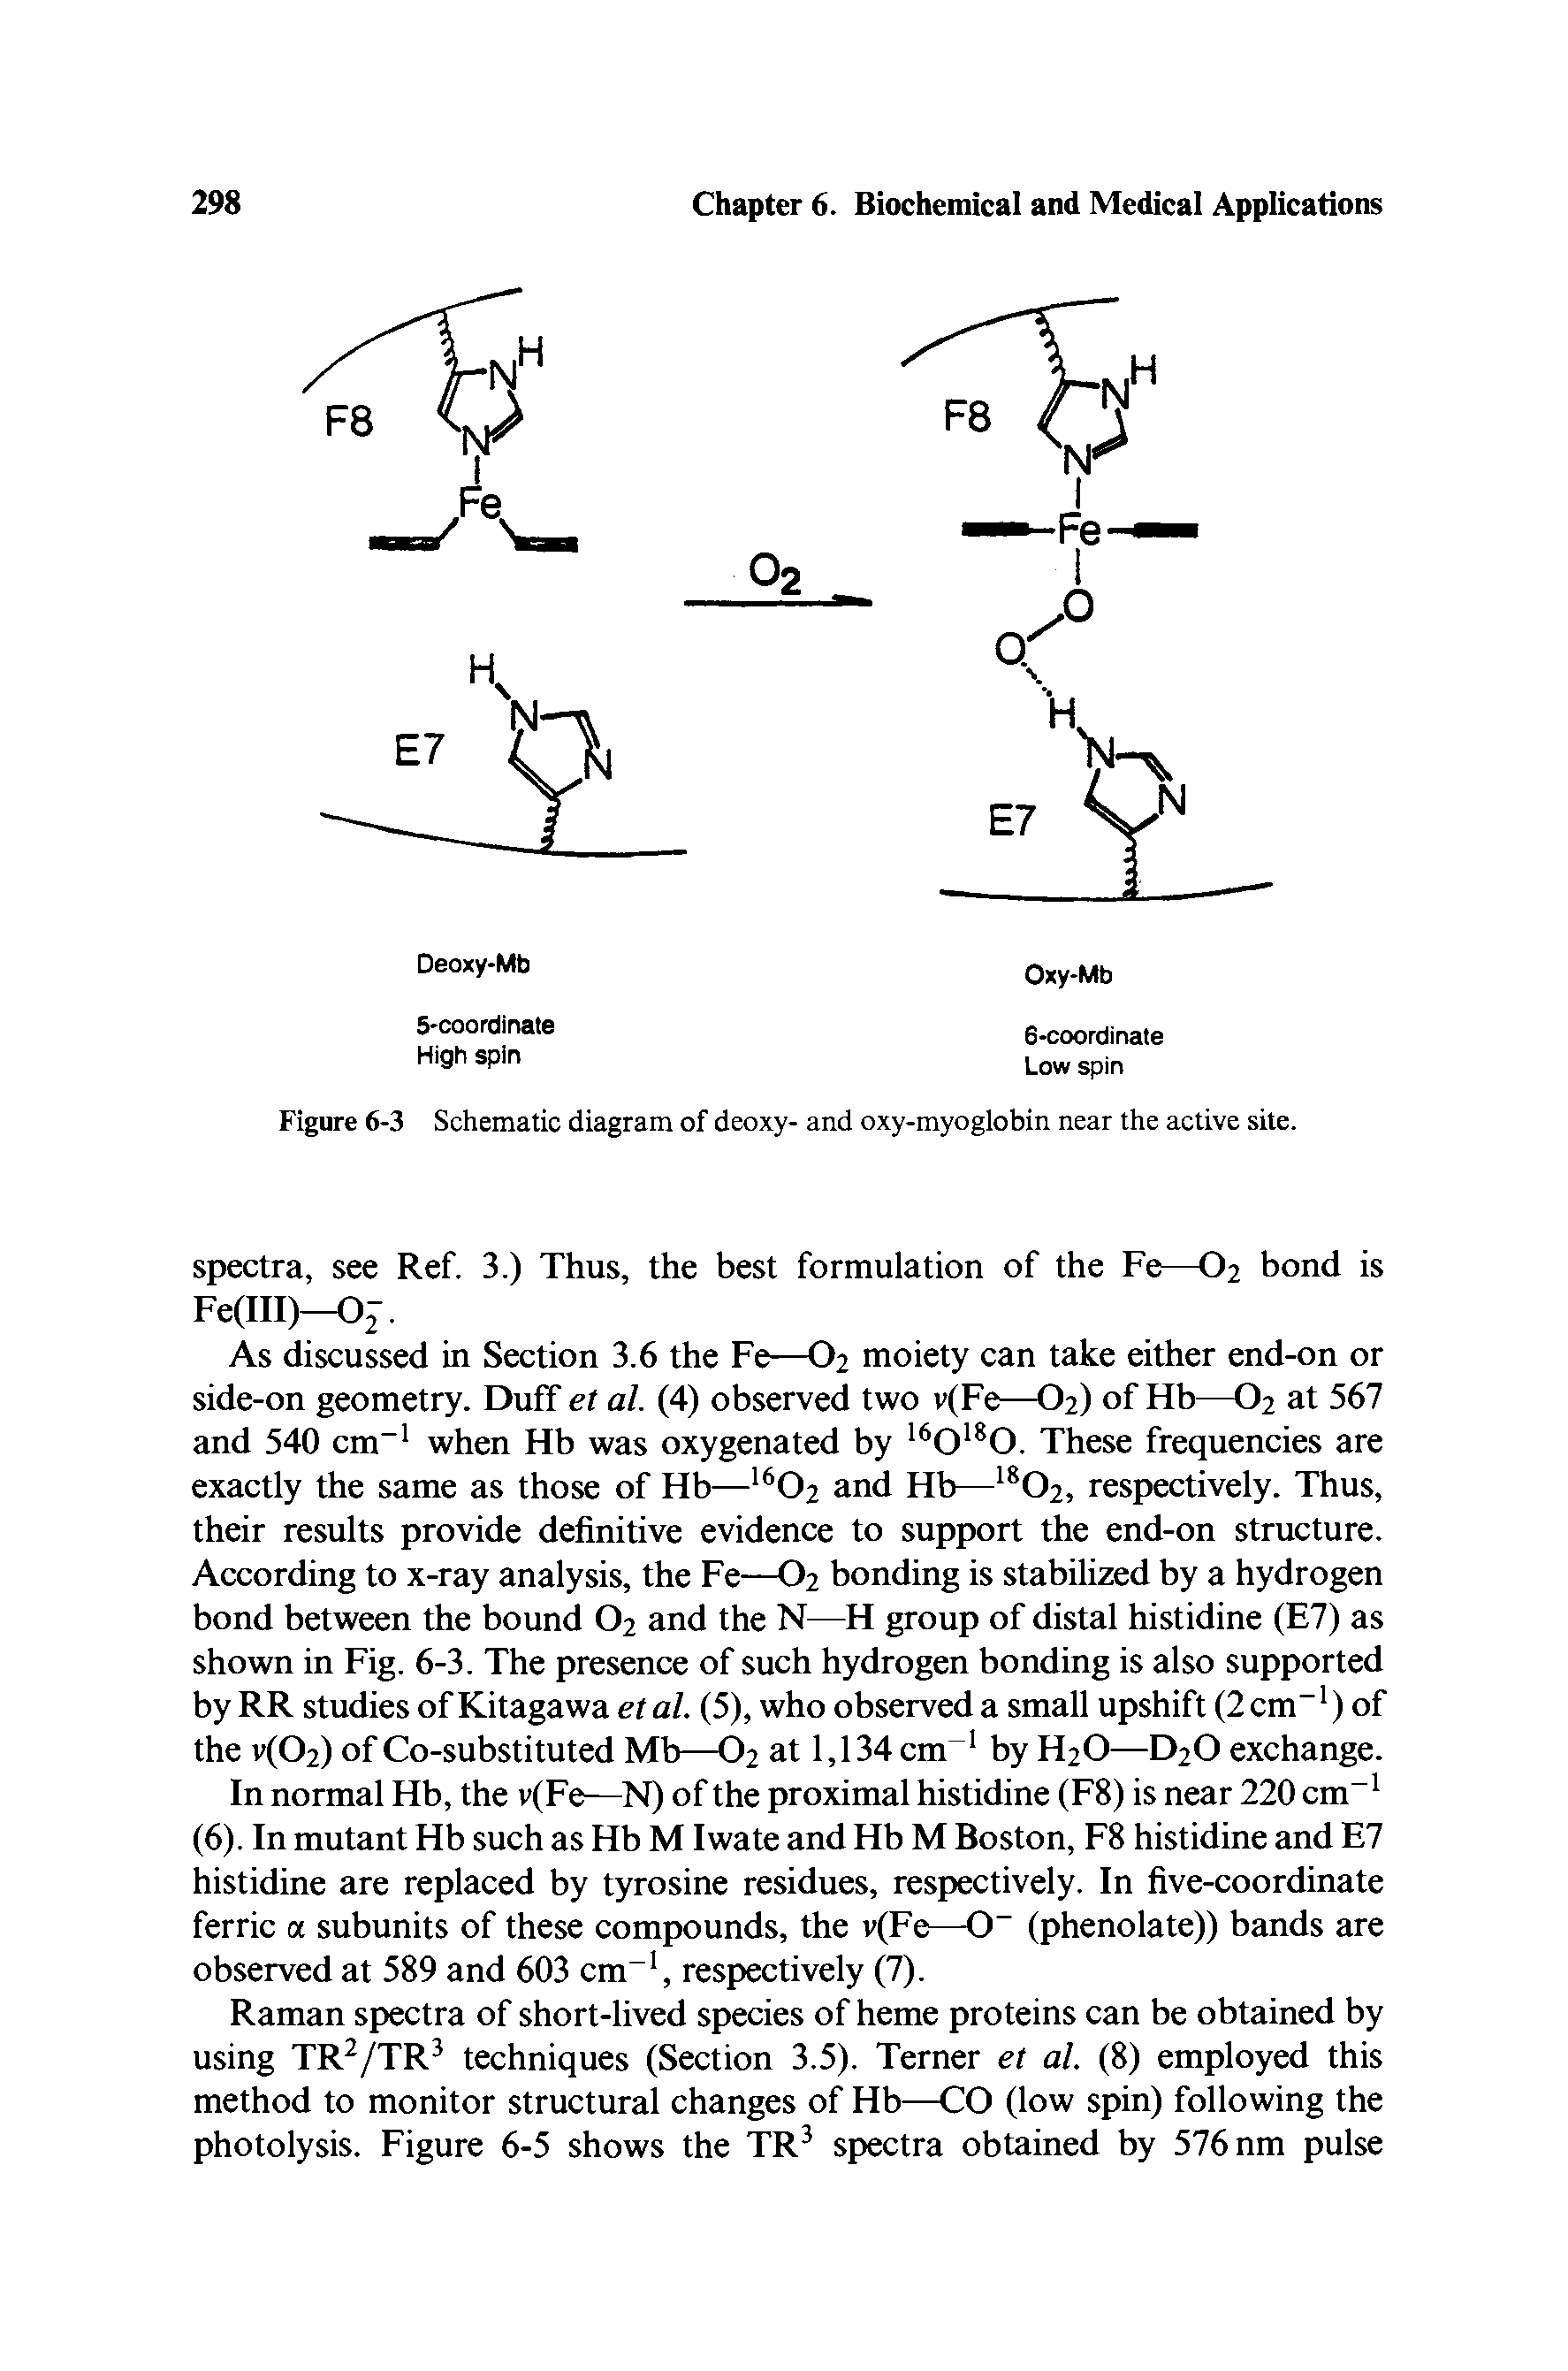 Figure 6-3 Schematic diagram of deoxy- and oxy-myoglobin near the active site.